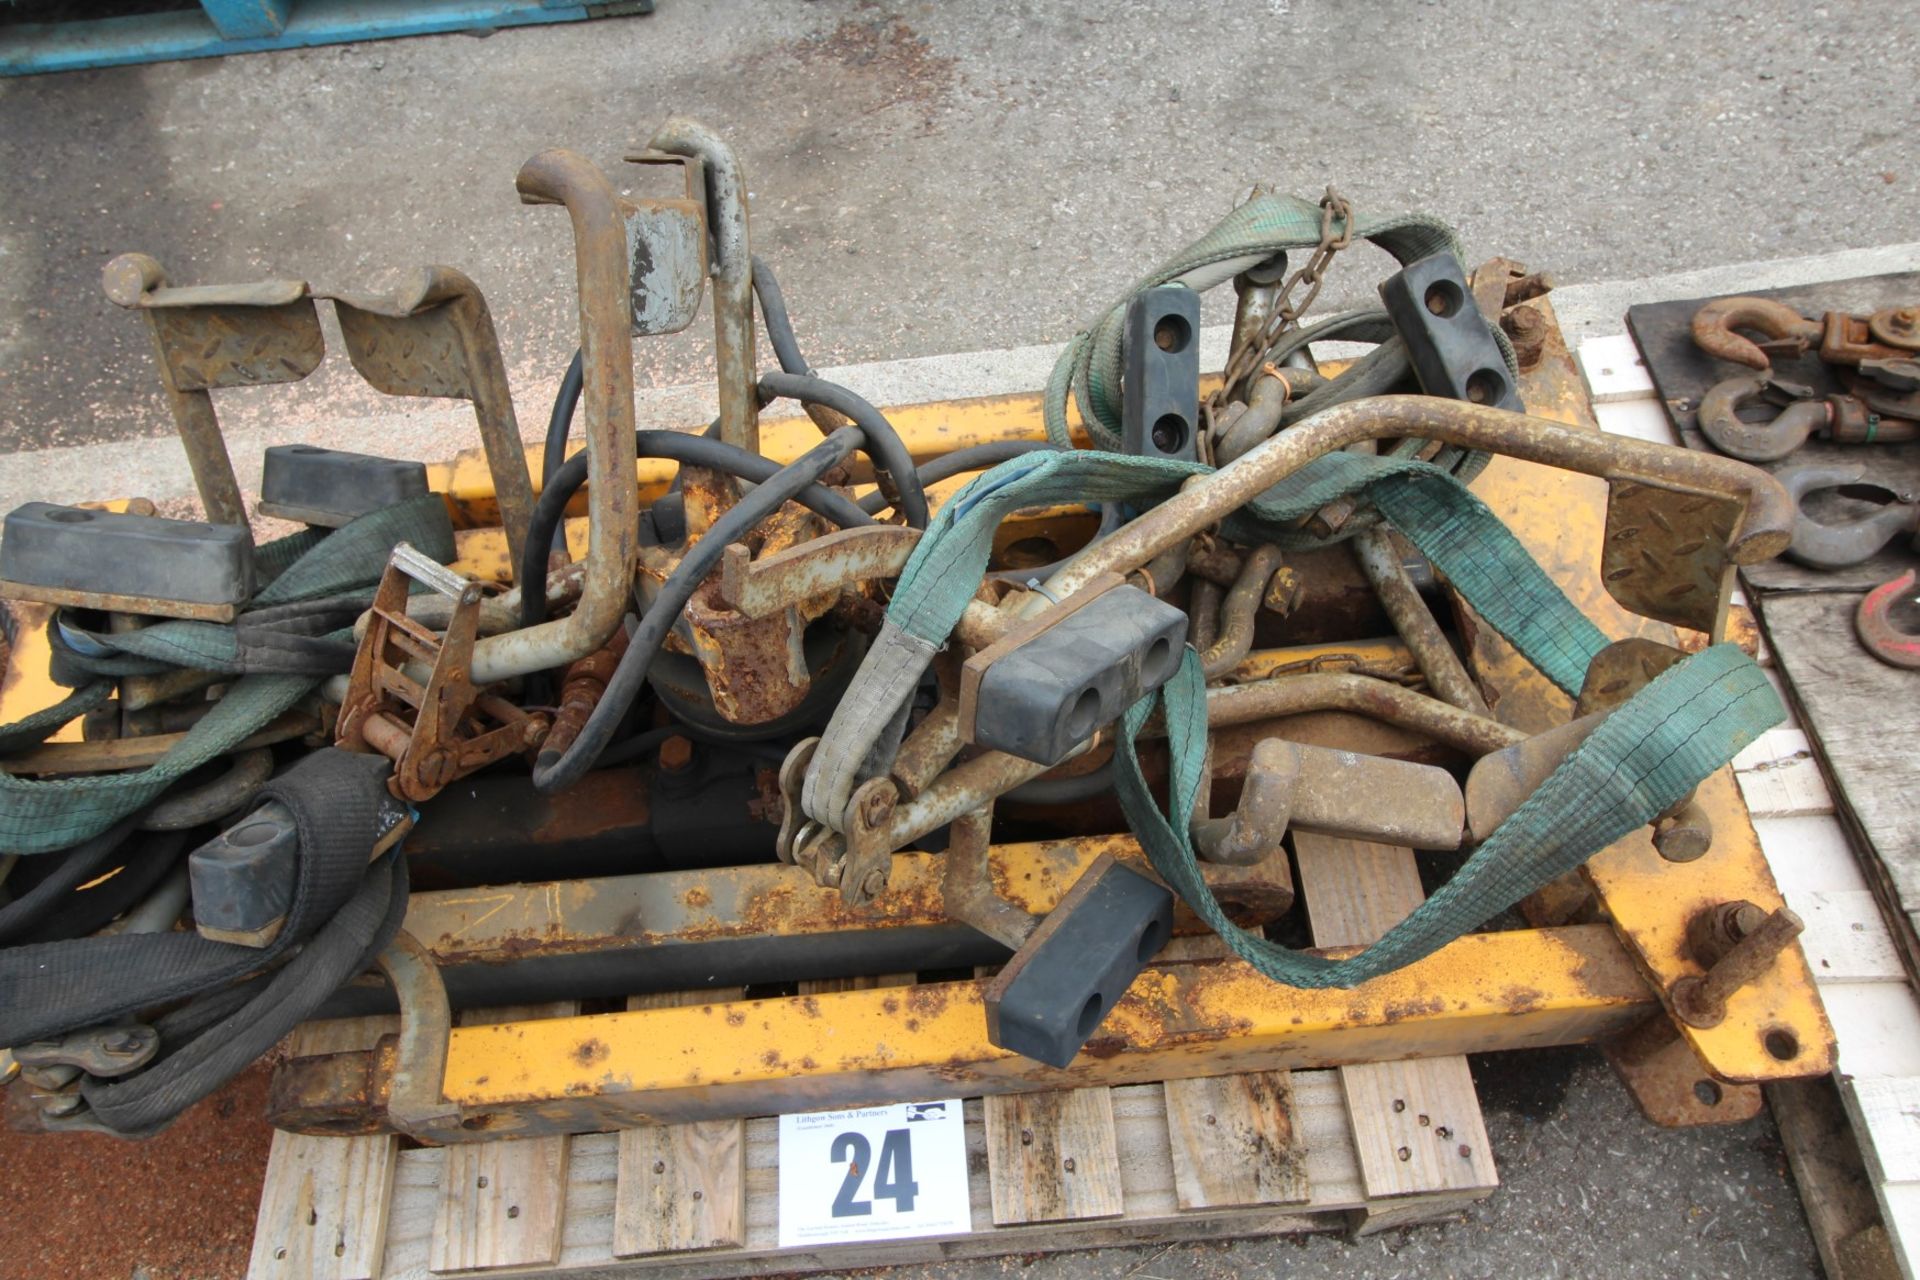 CONTENTS ON PALLET OF CRANE MOUNTABLE CAR LIFTING JIG WITH 3 CAR WHEEL BRACES